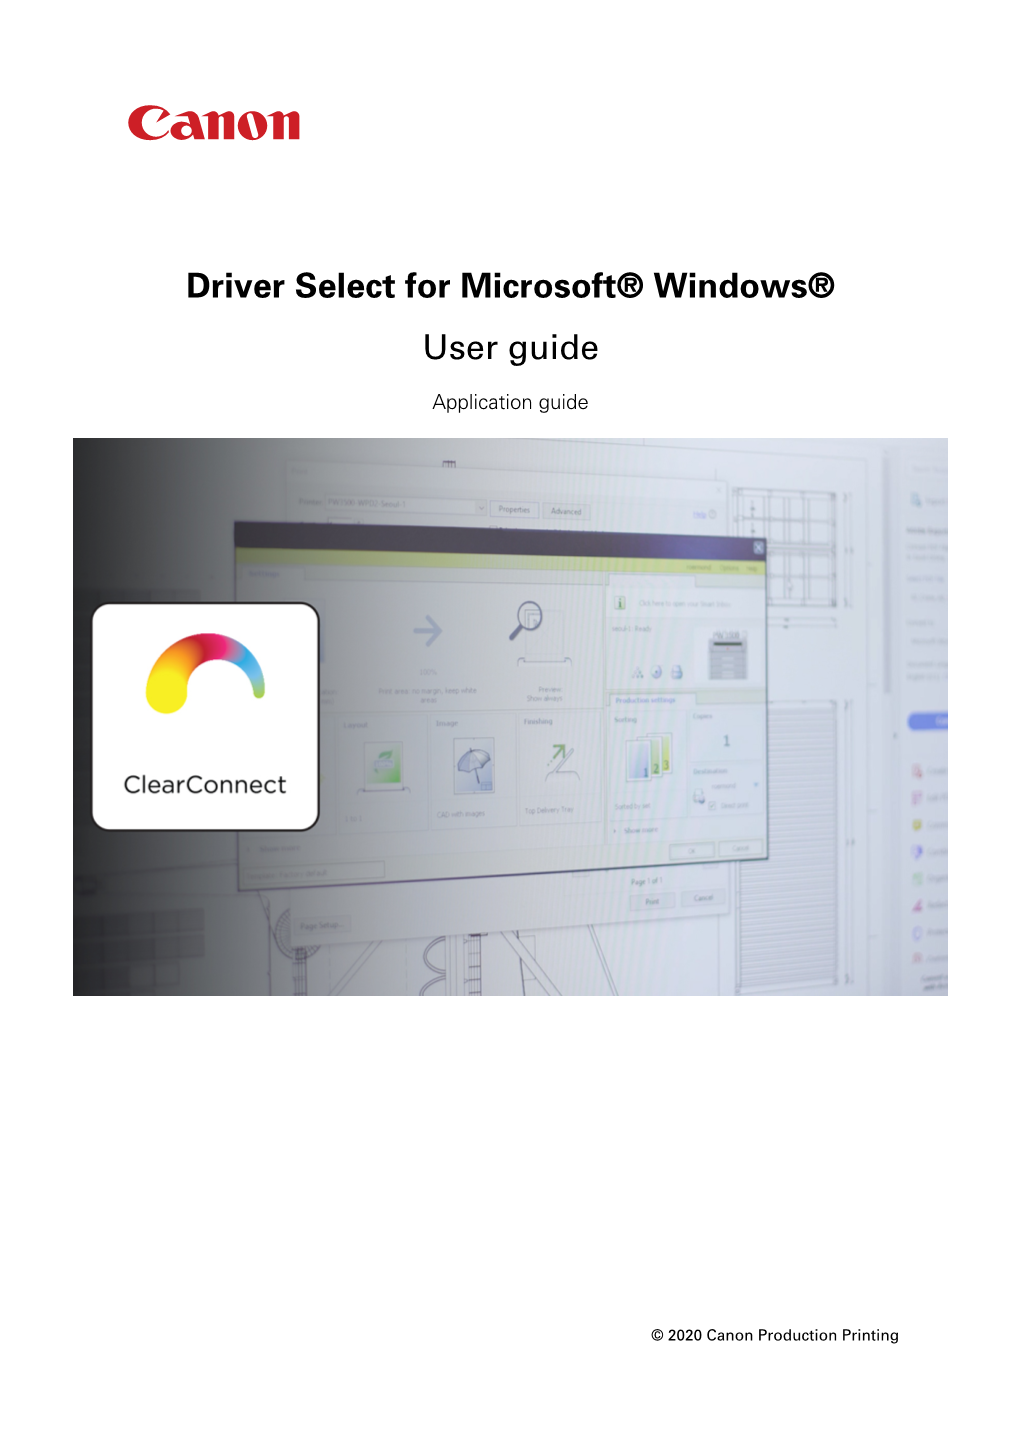 Driver Select for Microsoft® Windows® User Guide